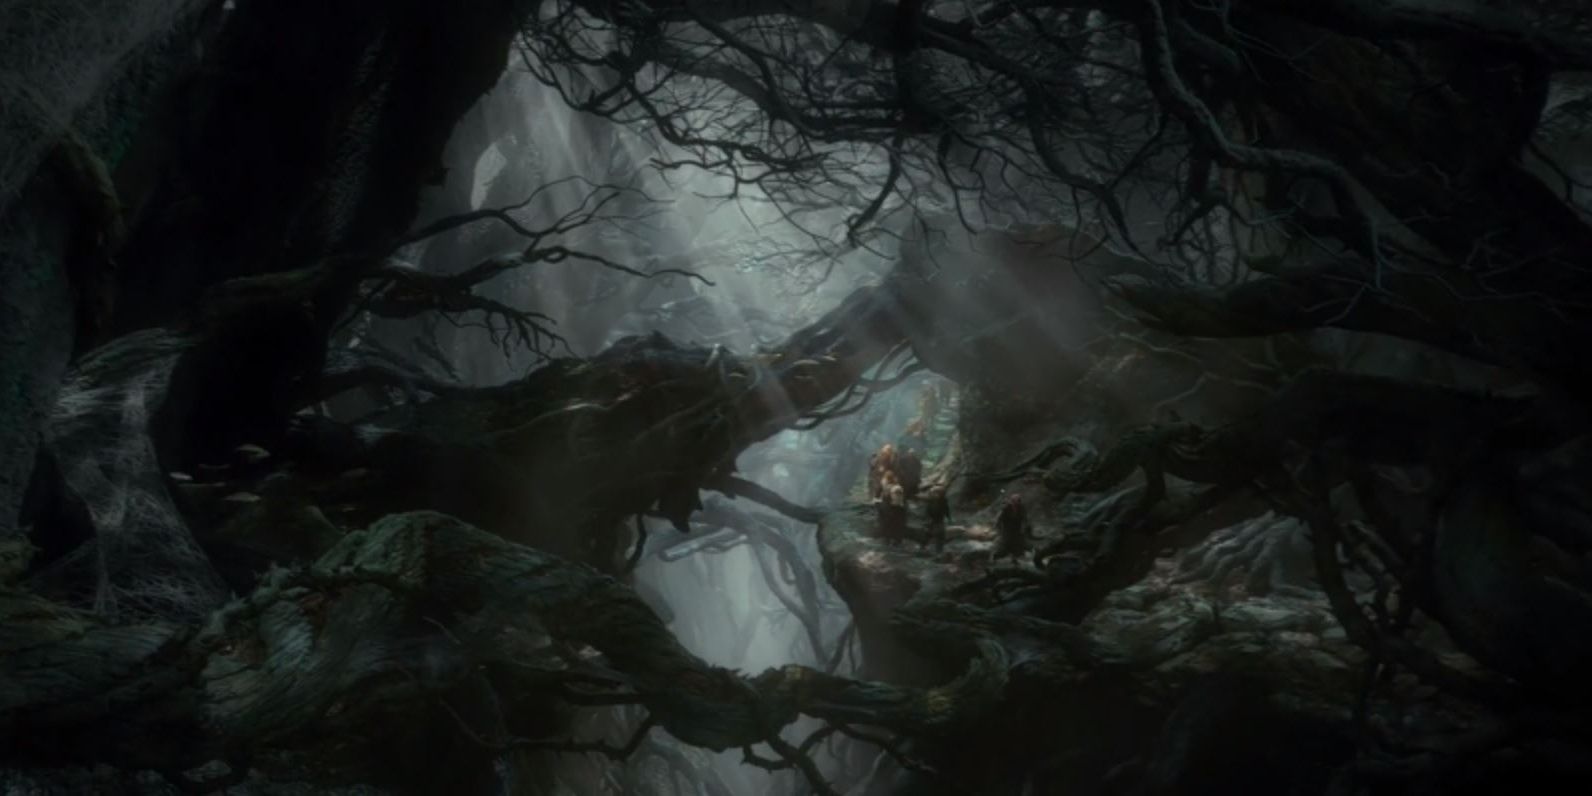 Mirkwood in The Hobbit: The Desolation of Smaug